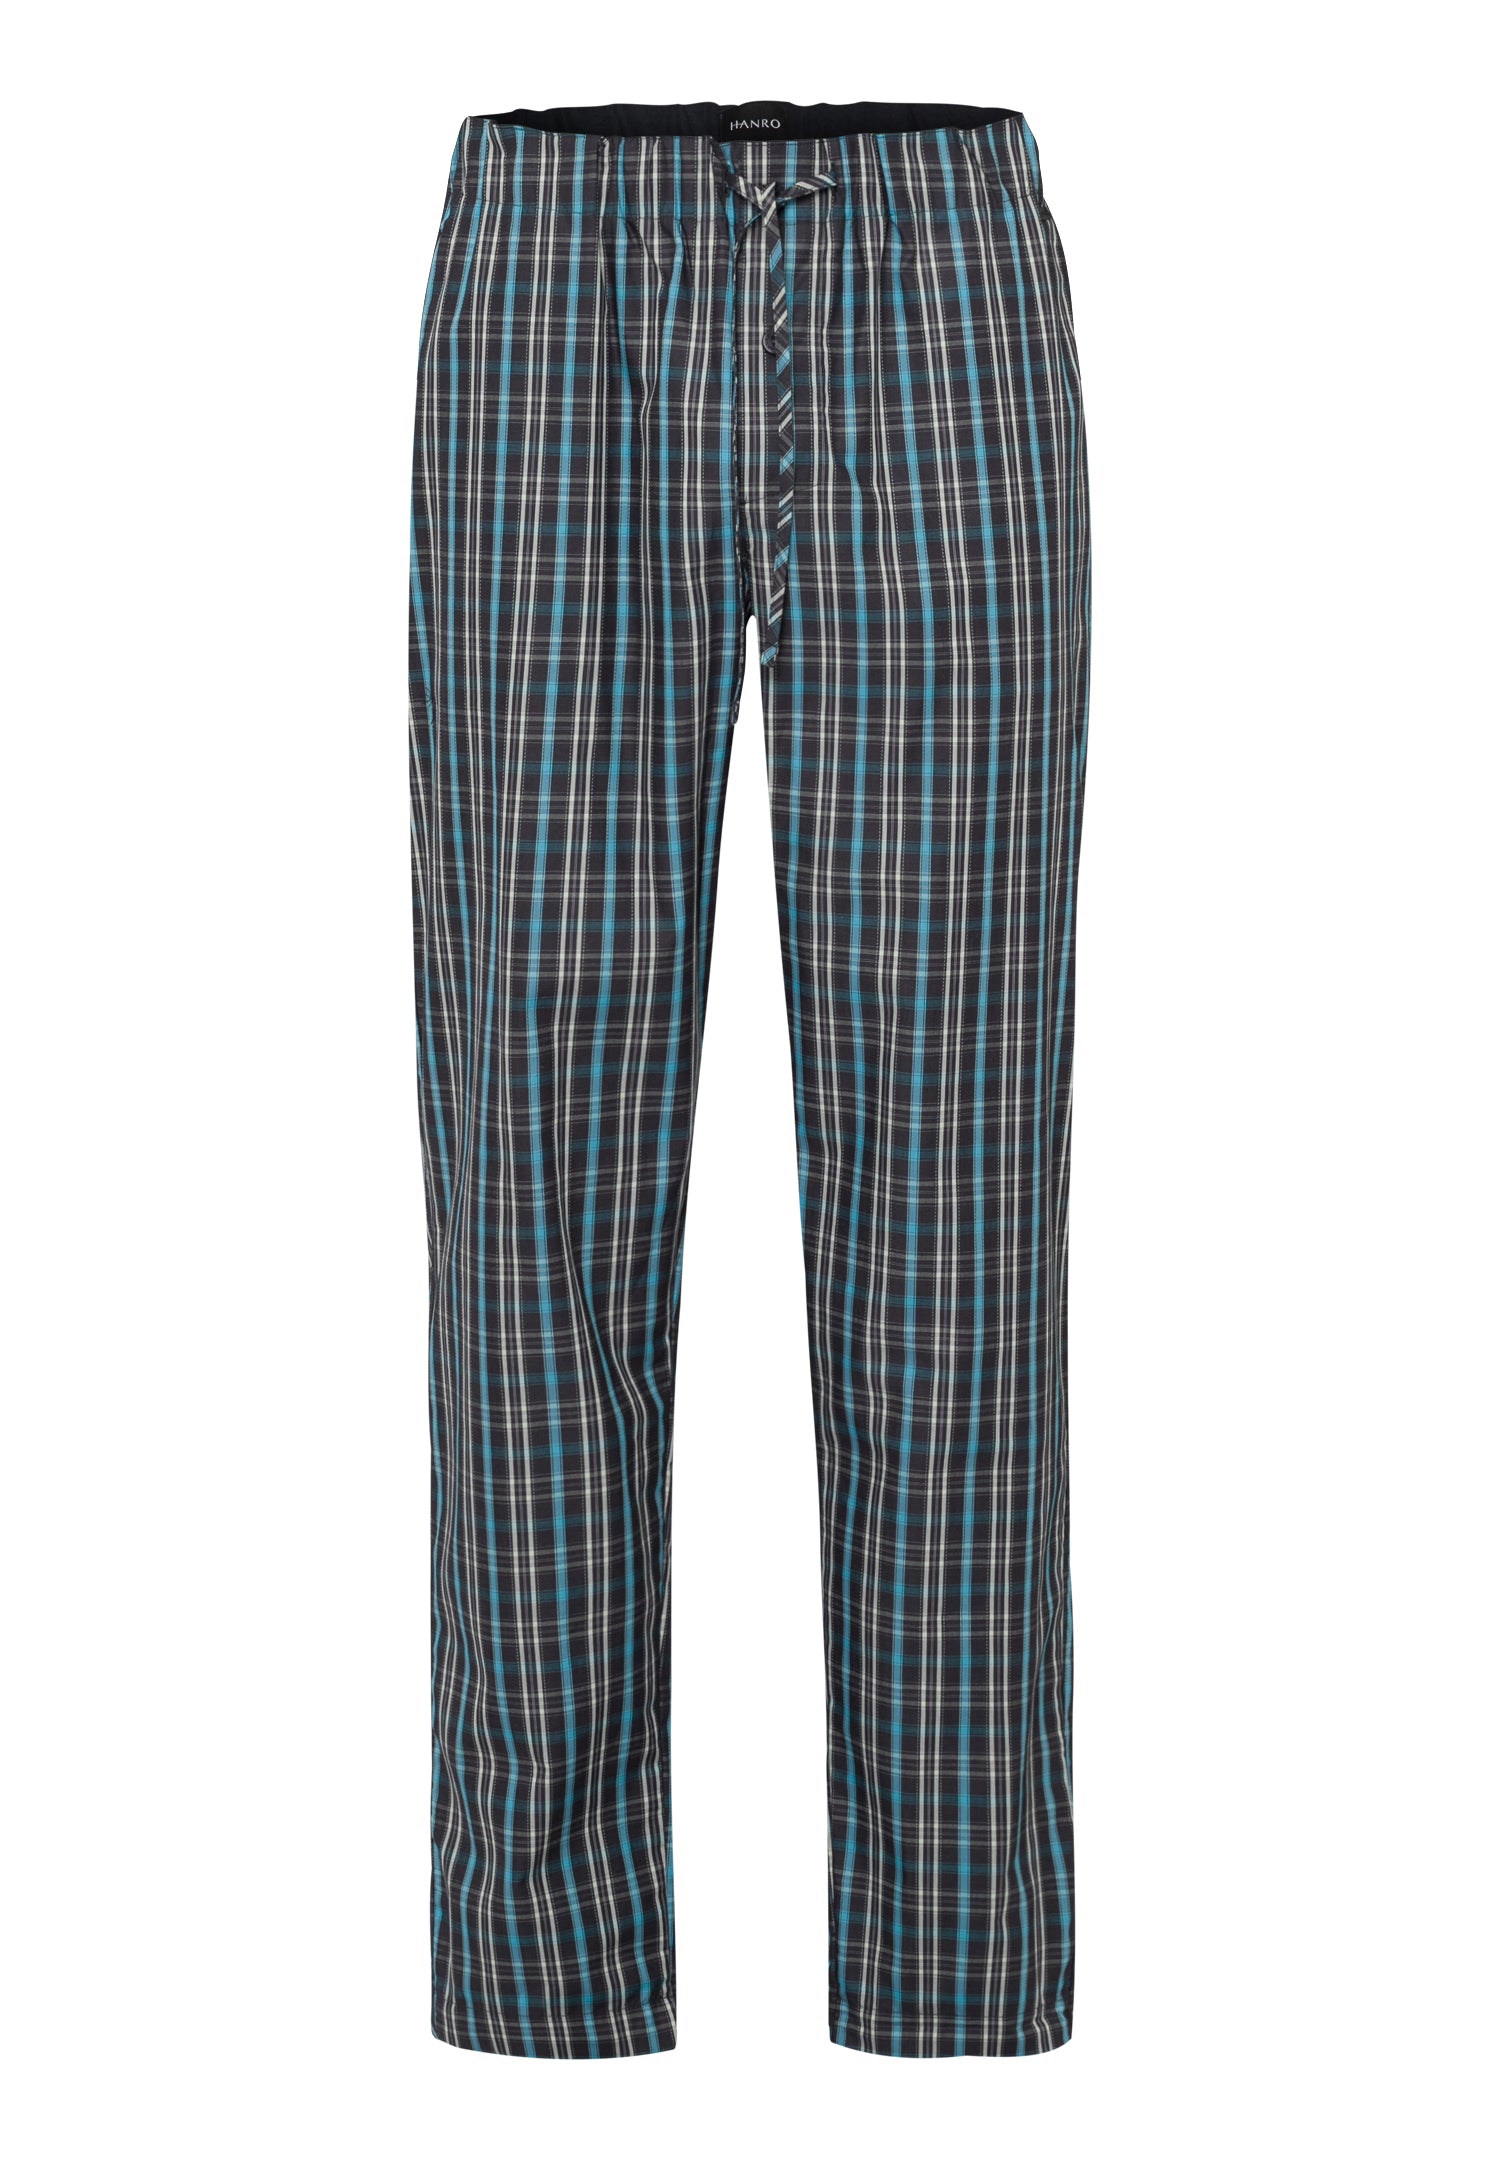 75436 Night & Day Woven Lounge Pant - 2970 Arctic Plaid Check